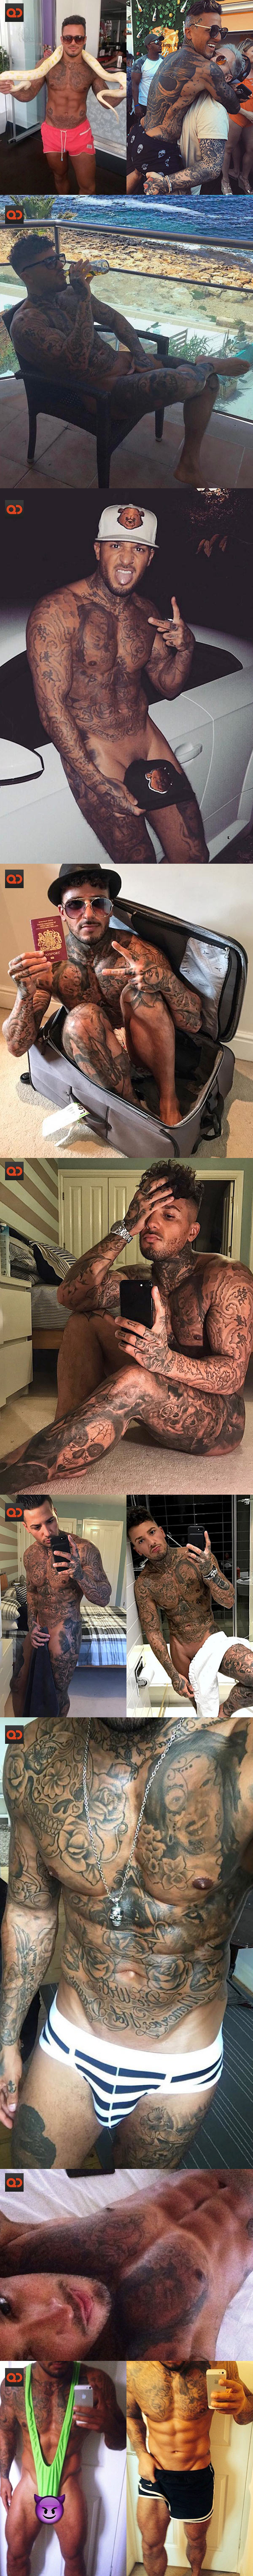 Paul Hutchie, Fashion Model And Tattoo Enthusiast, Exposed His Cock On Snapchat!